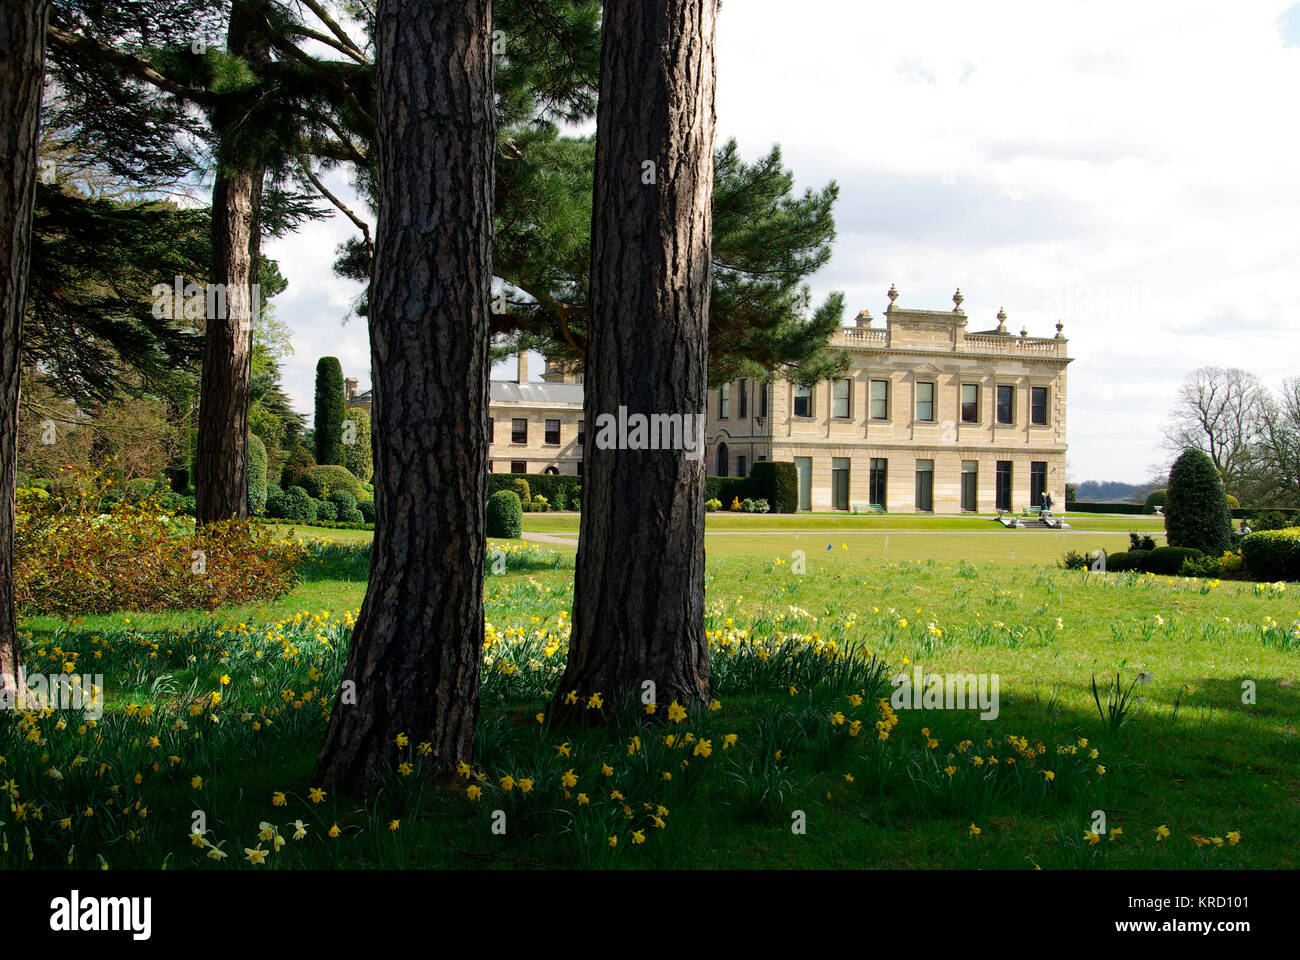 Brodsworth Hall, near Doncaster, South Yorkshire.  The Hall was built in the 1860s in the Italianate style.  English Heritage acquired the Hall in 1990 and it is now open to the public.      Date: April 2009 Stock Photo